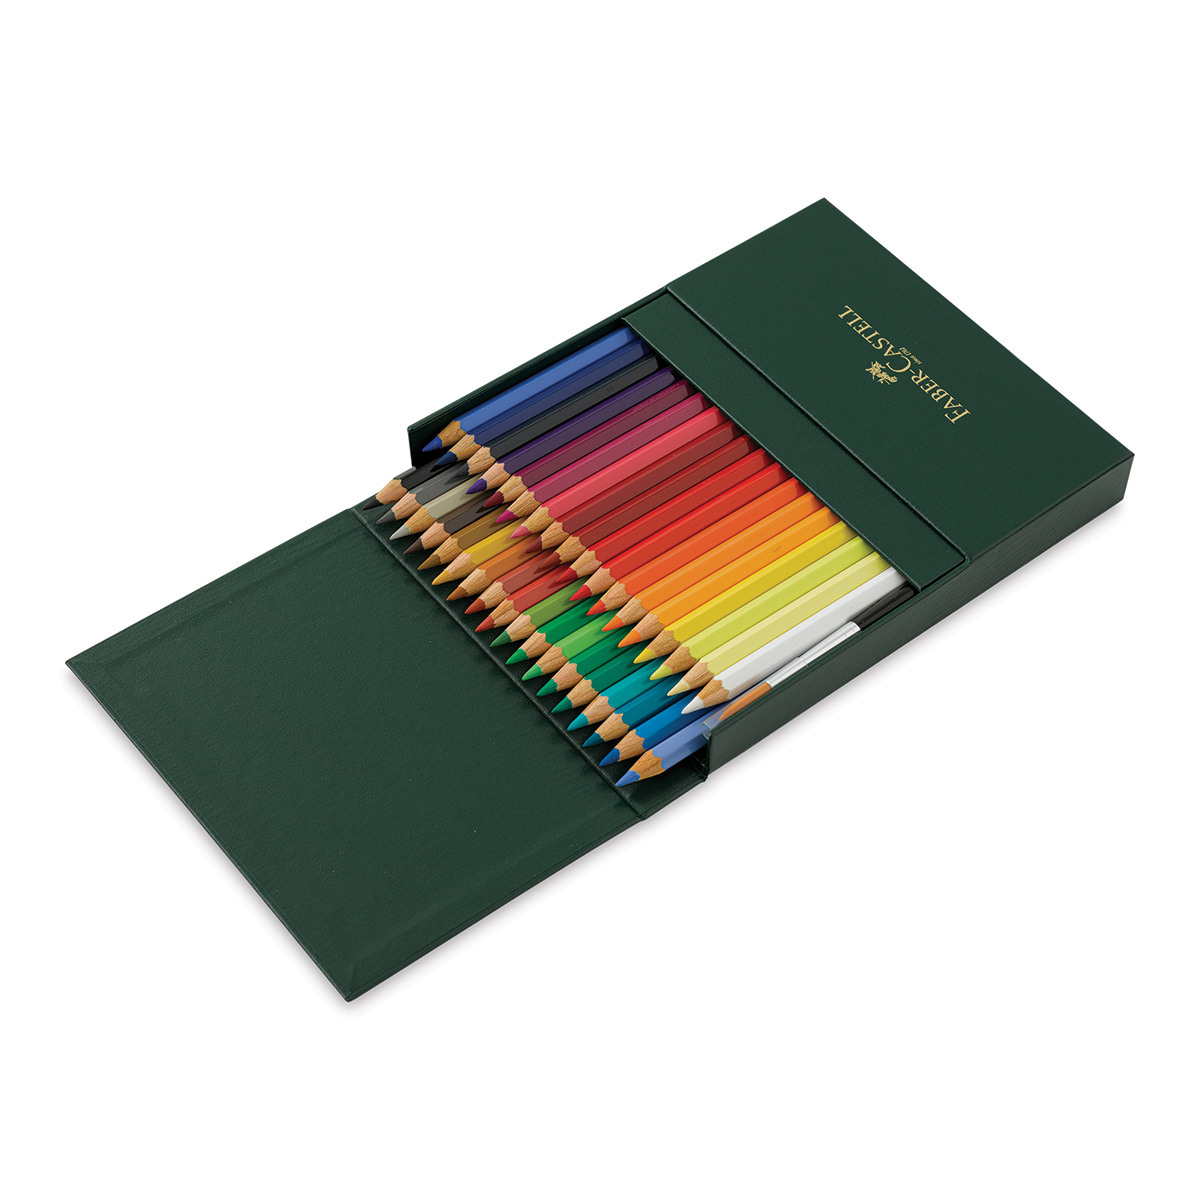 Is this fake Faber Castell durer pencils? : r/ColoredPencils